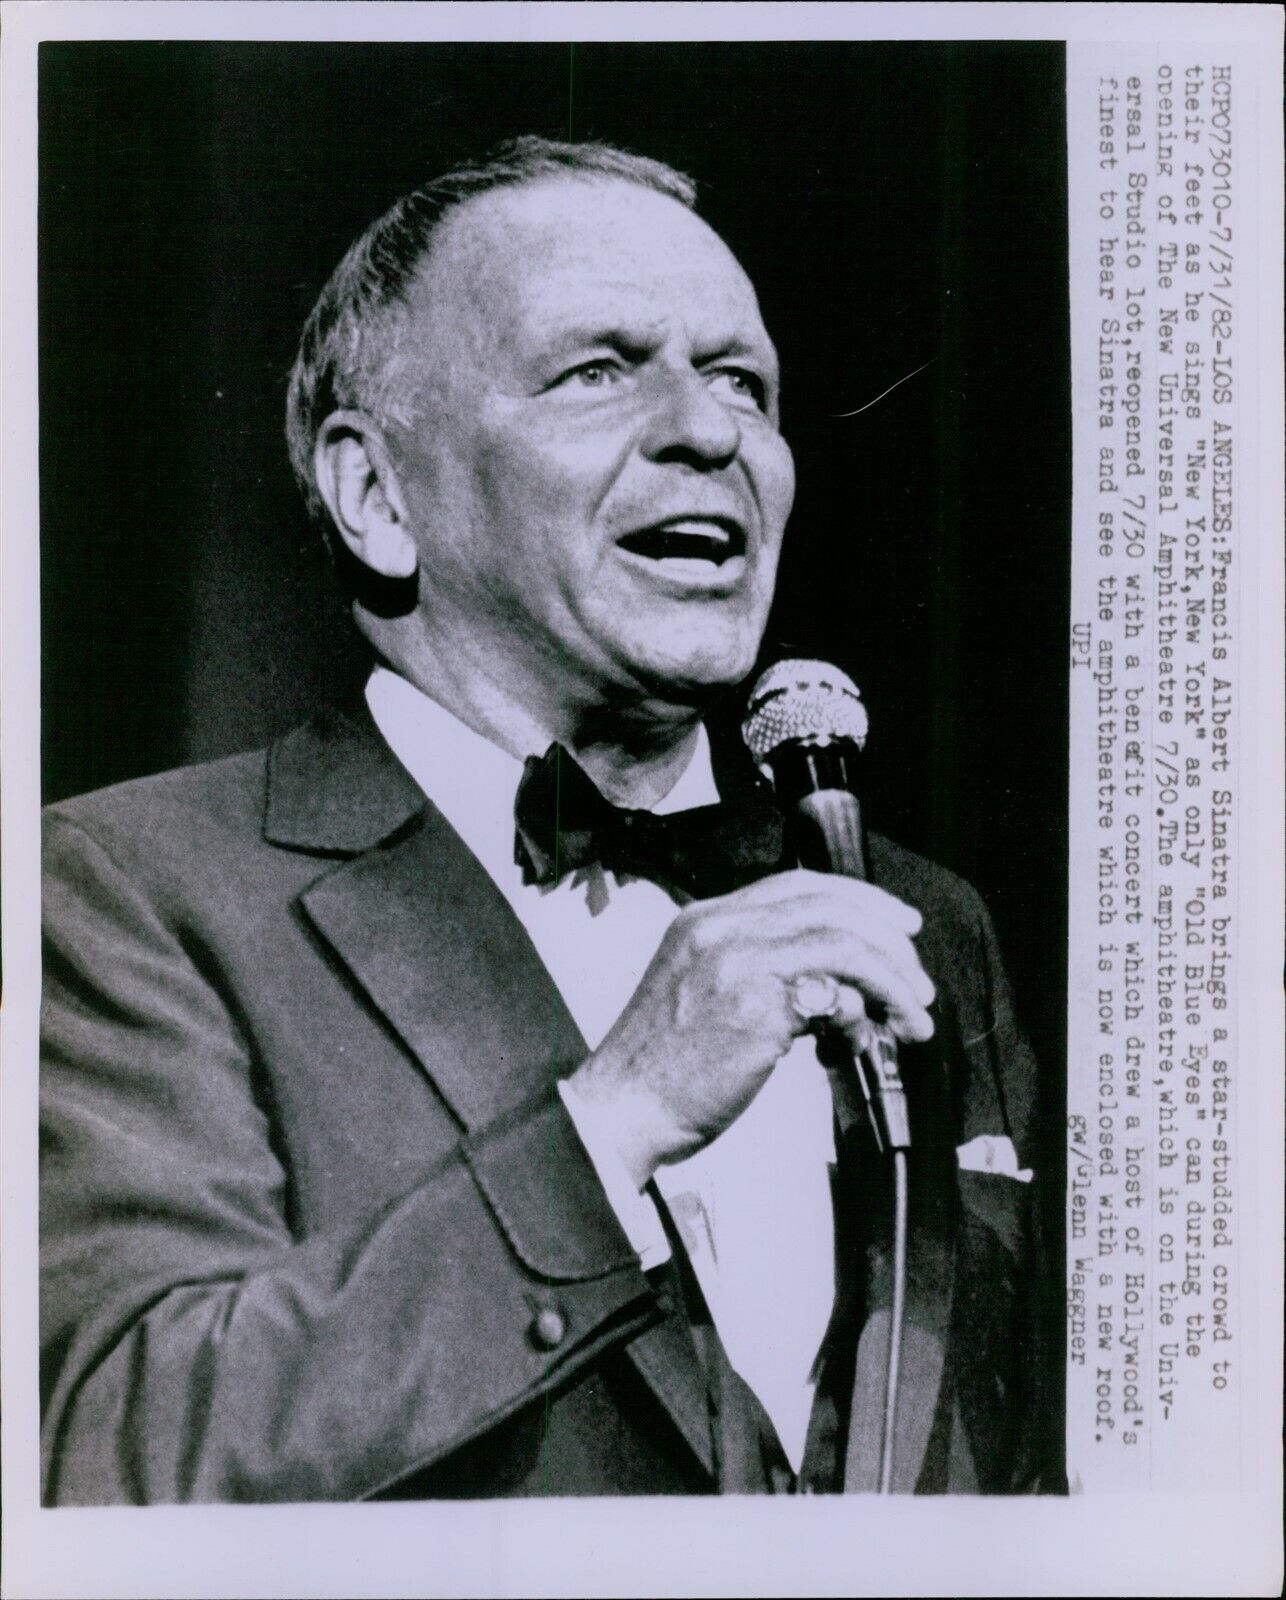 LG847 1982 Wire Photo FRANK SINATRA Old Blue Eyes Handsome Singer Performance